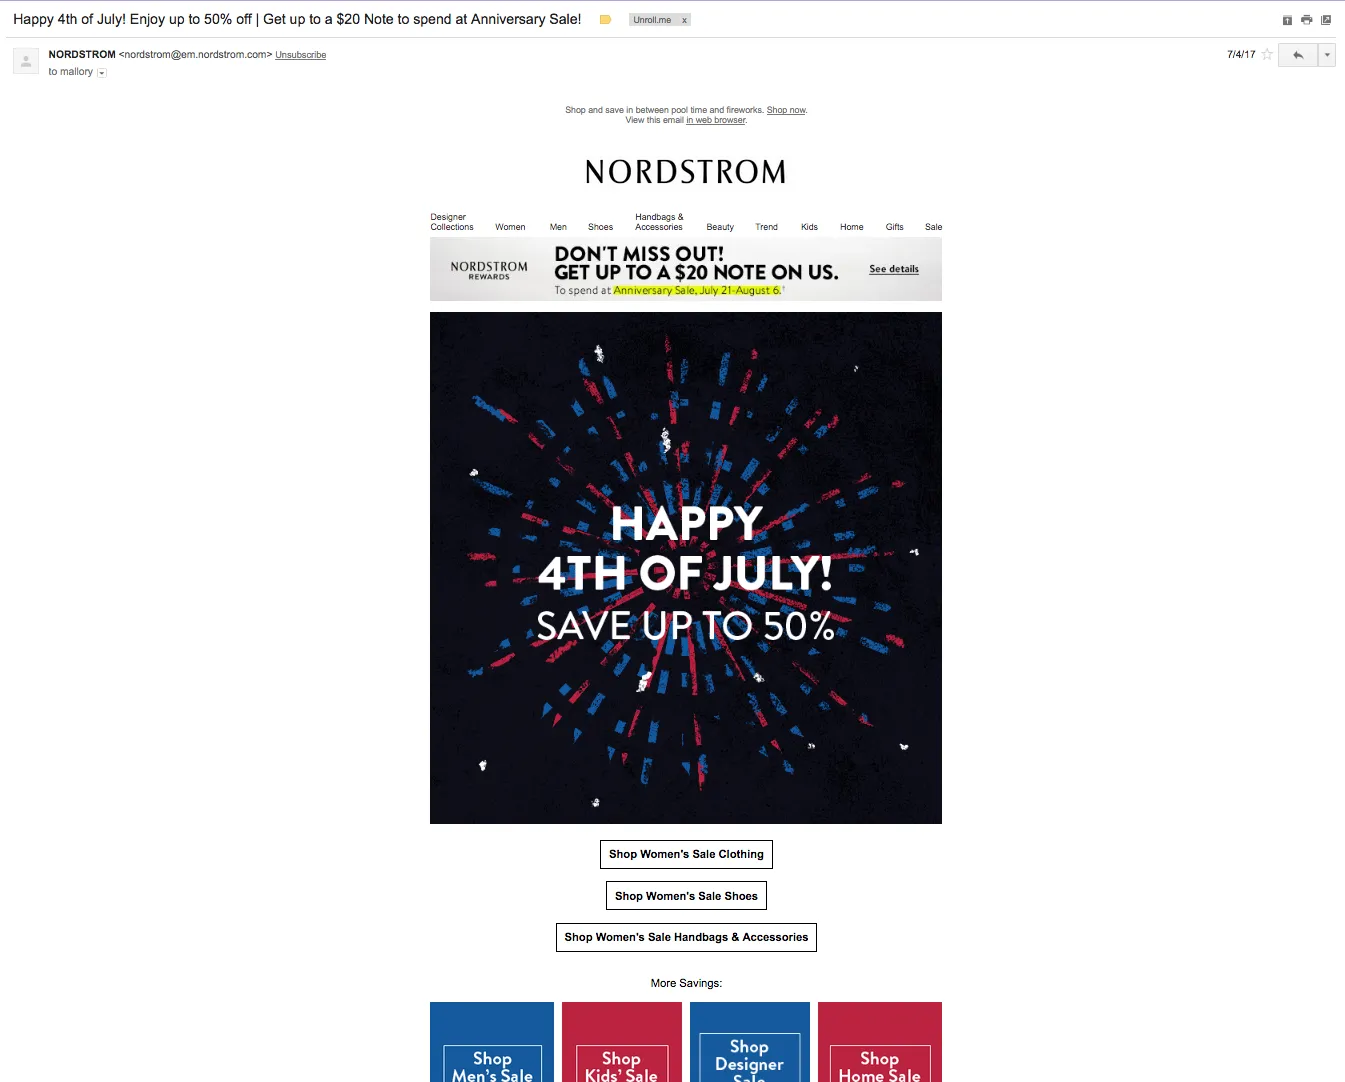 Nordstrom 4th of July email